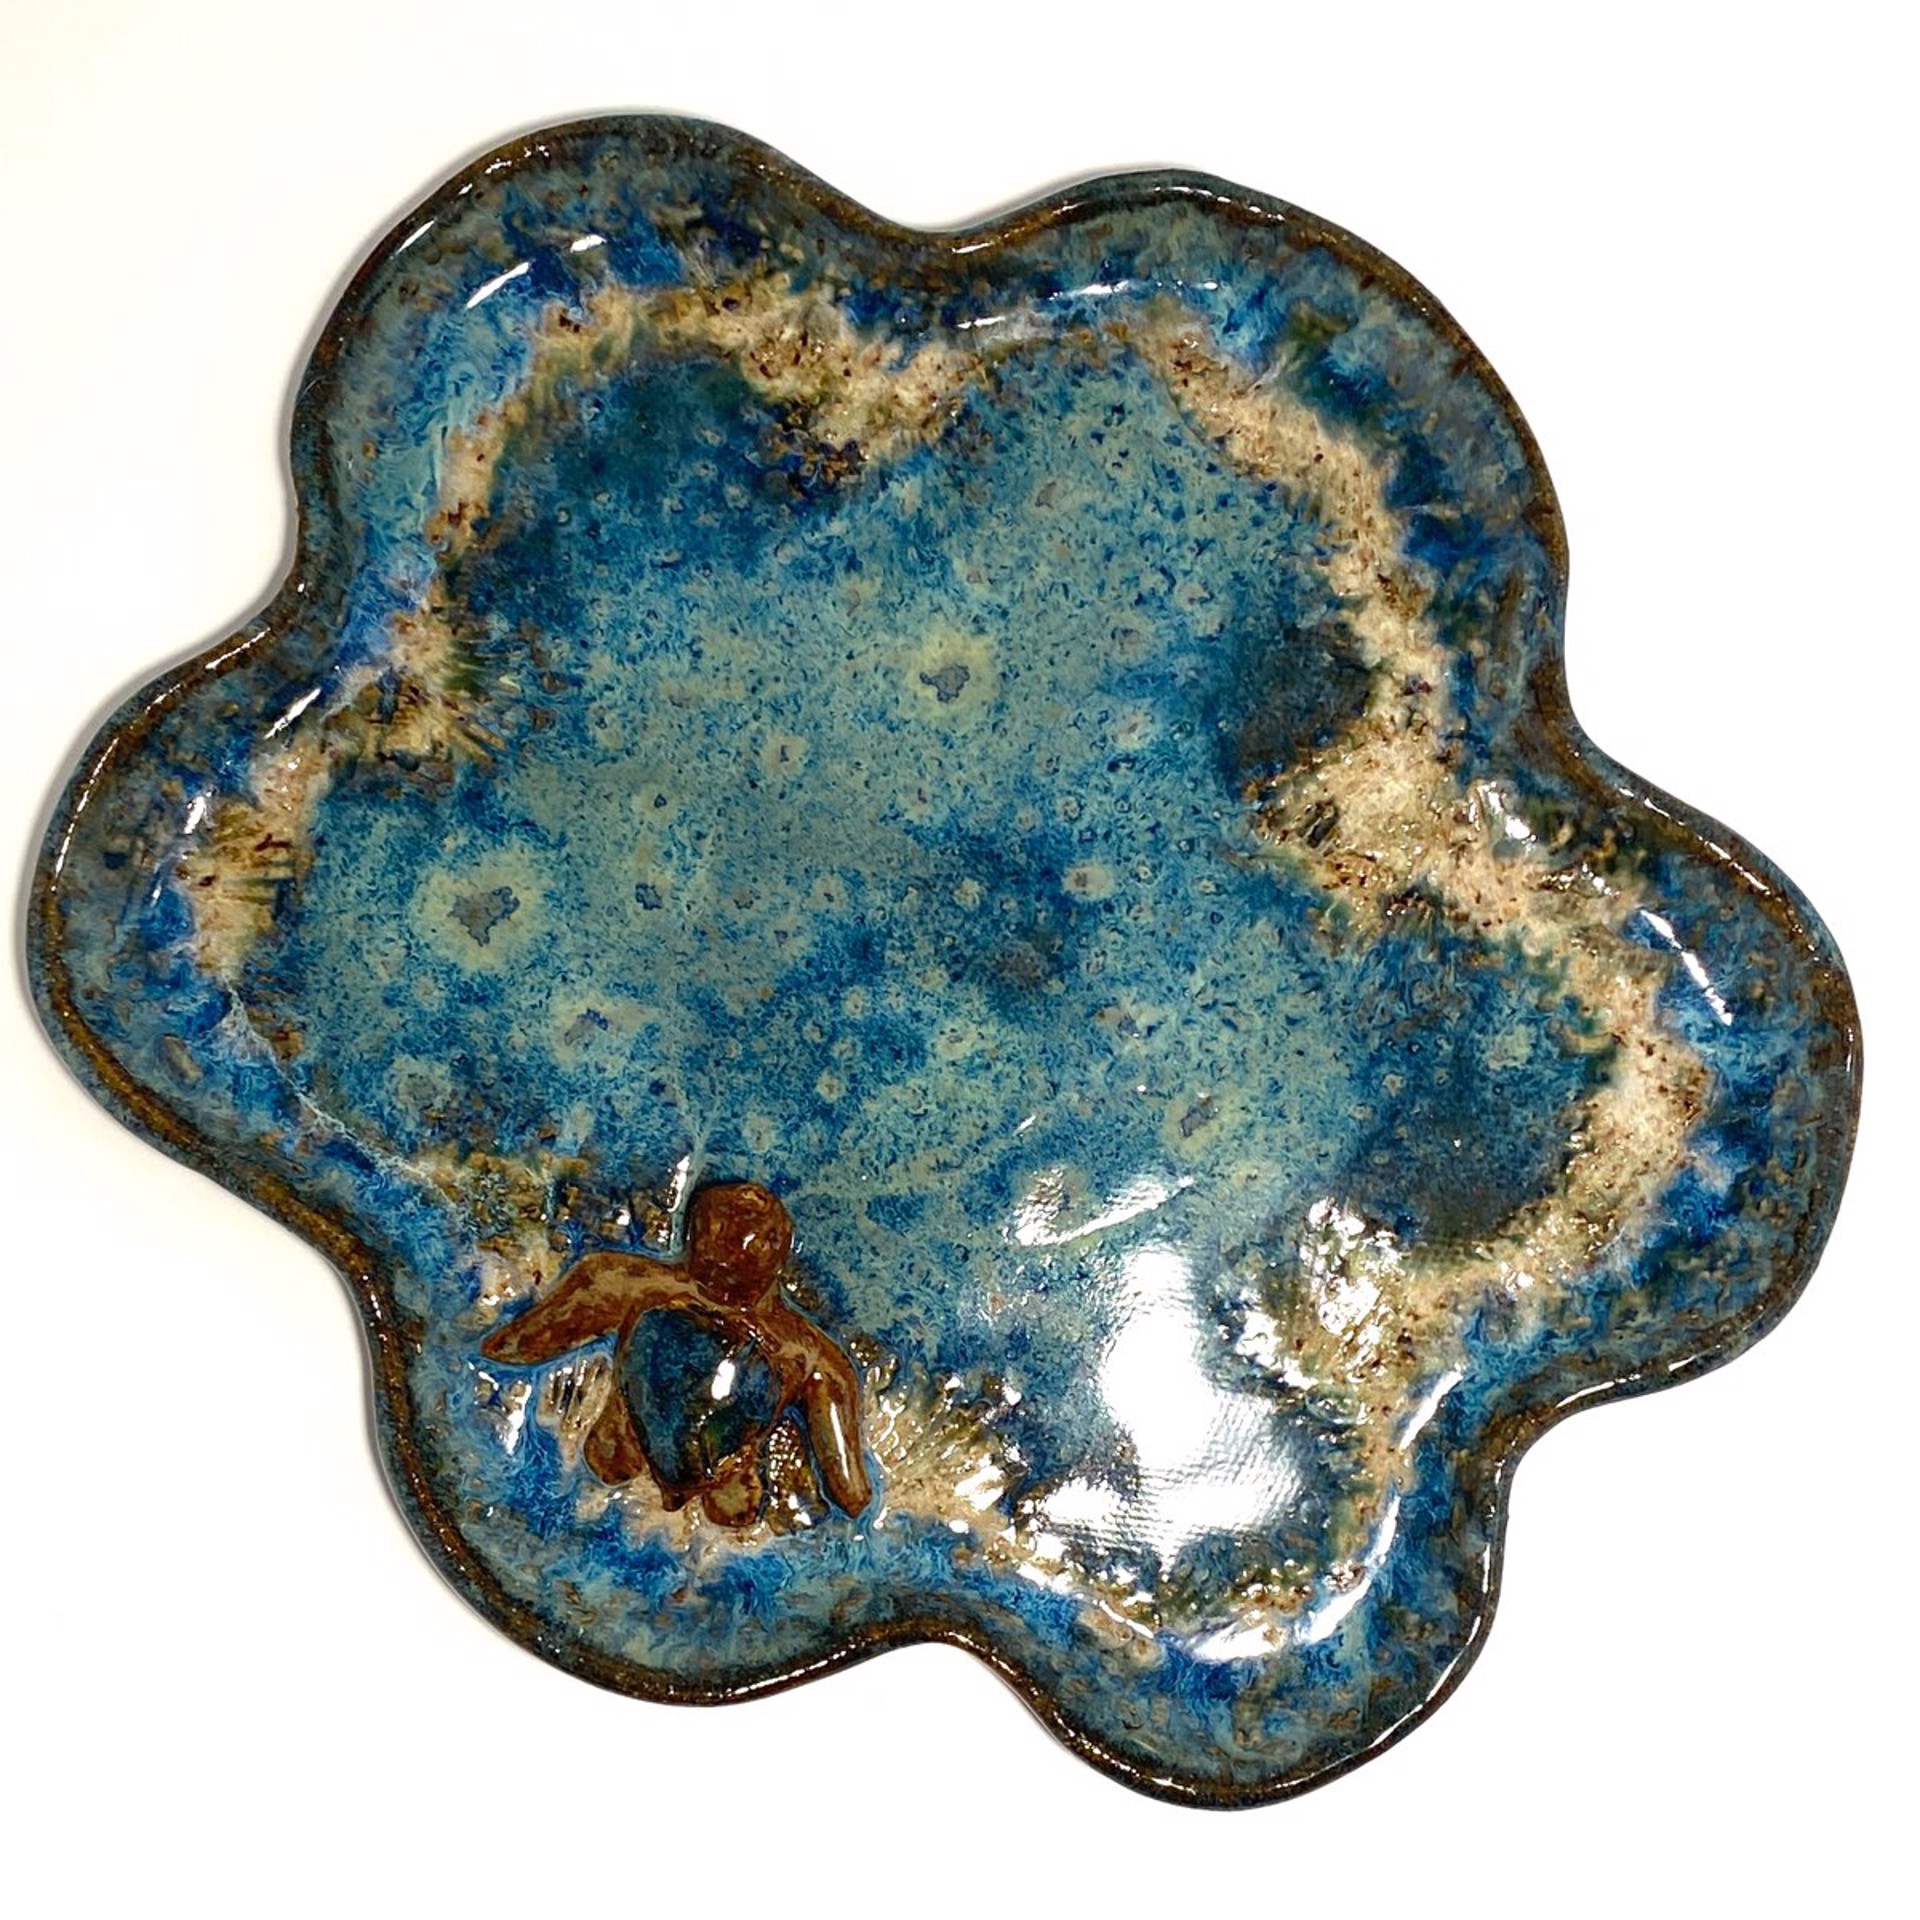 Small Plate with Turtle (Blue Glaze) LG23-1146 by Jim & Steffi Logan